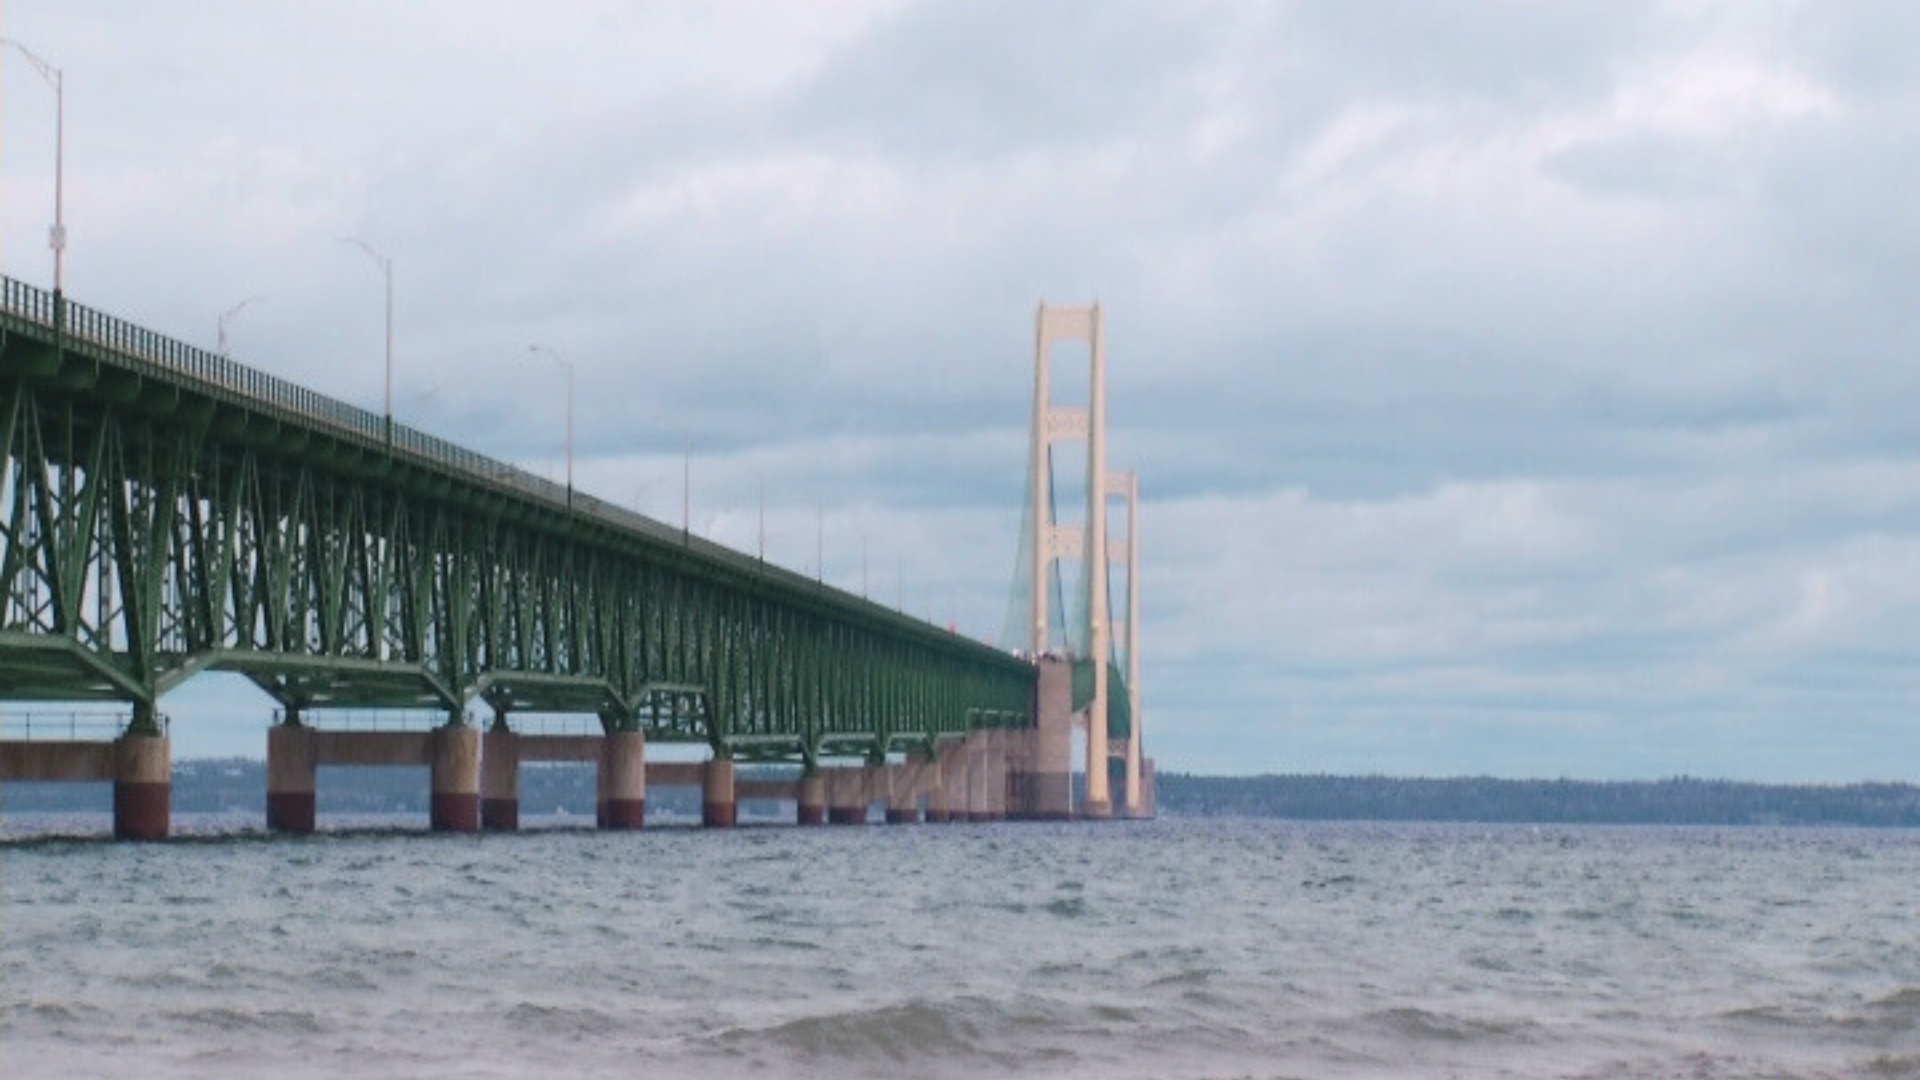 Michigan Public Service Commission approves Enbridge’s Line 5 tunnel under the Straits of Mackinac